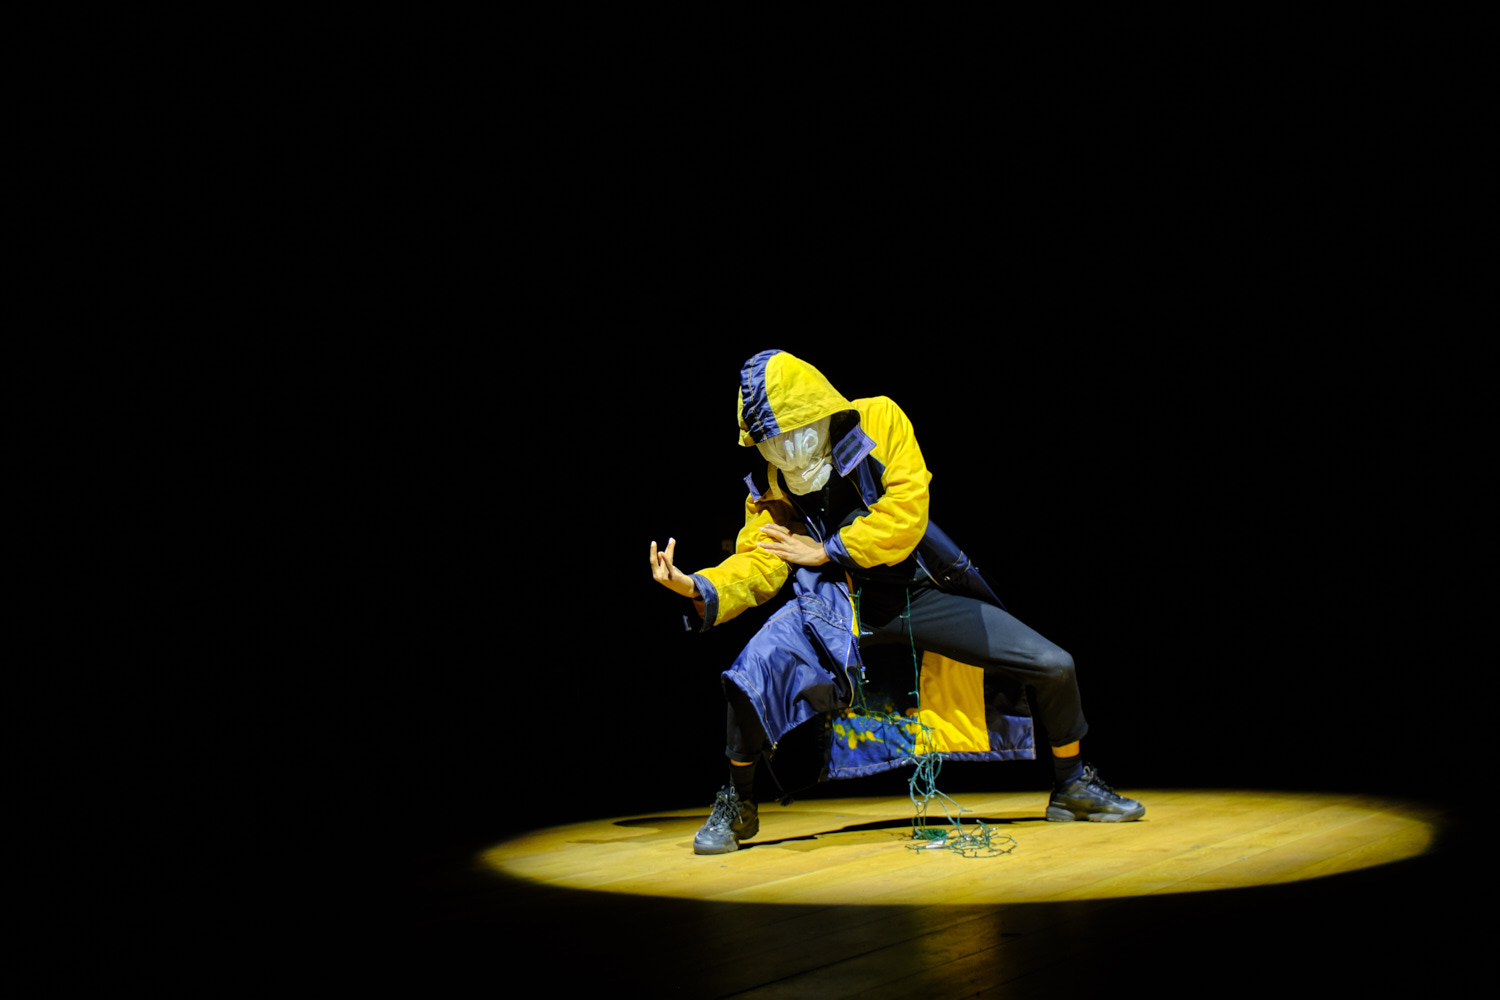 A young artist from in the UK dances, spotlit on a black stage wearing a mask and a blue and yellow coat.